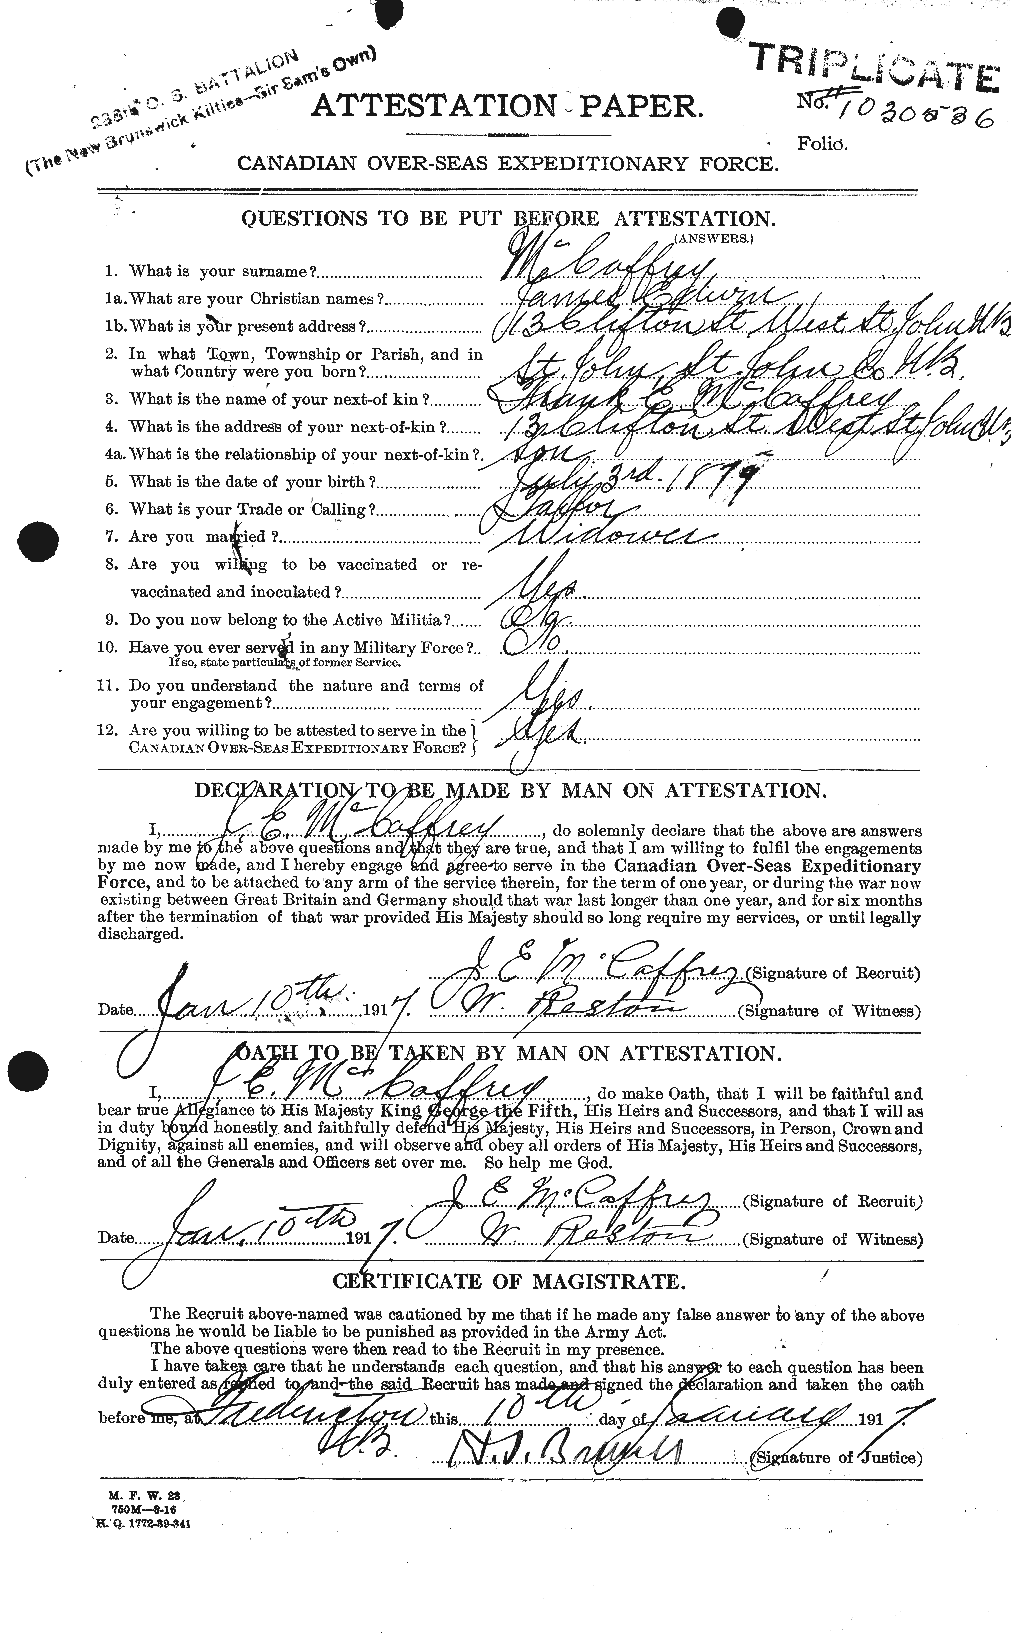 Personnel Records of the First World War - CEF 132137a